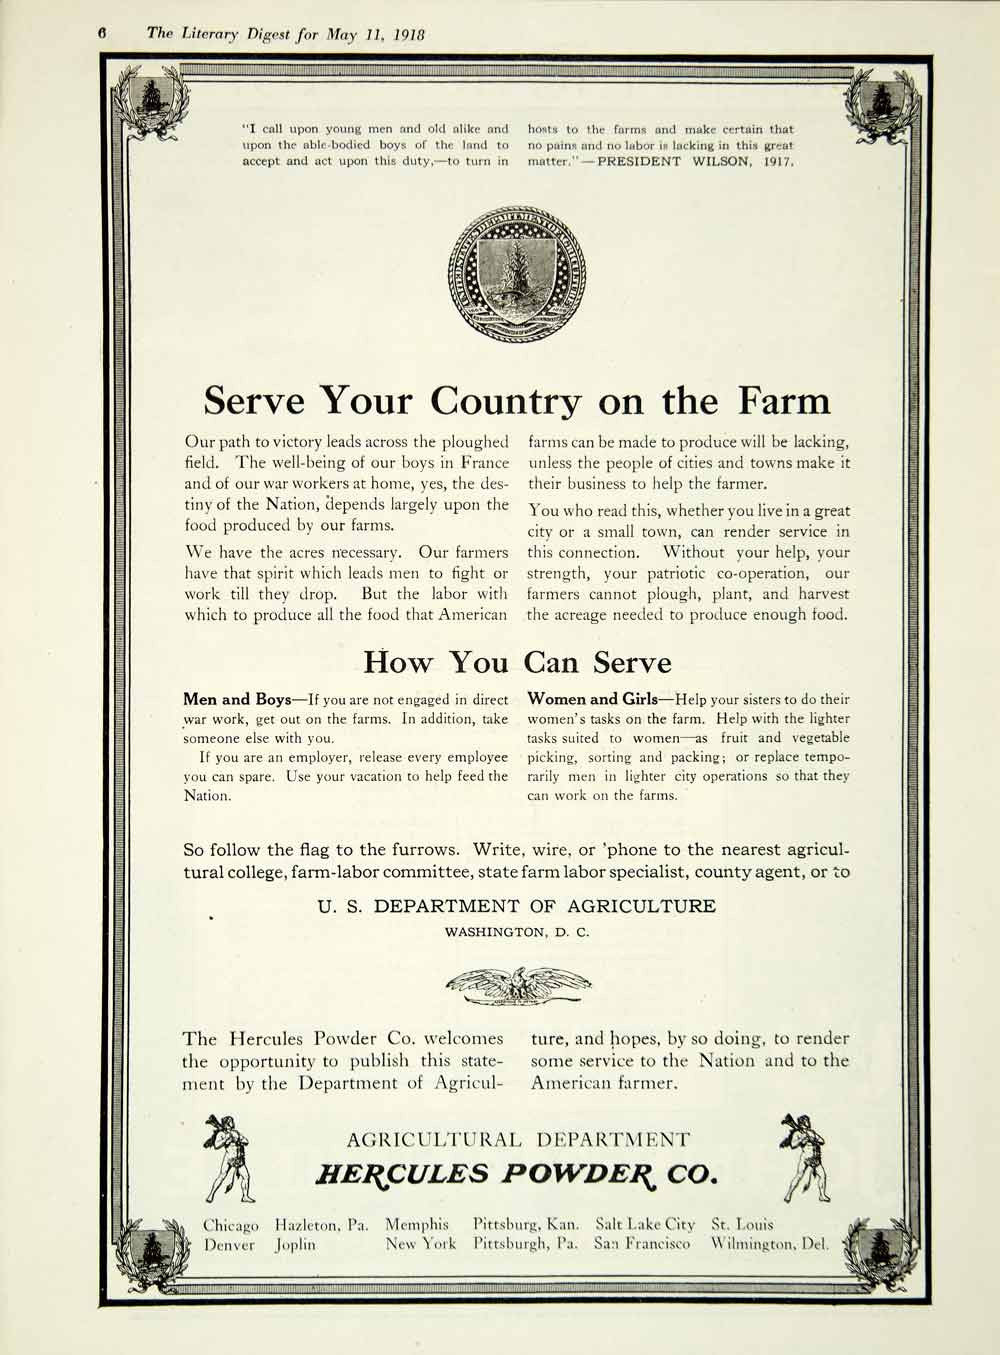 1918 Ad Hercules Powder Company United States Department Agriculture WWI YLD1 - Period Paper
